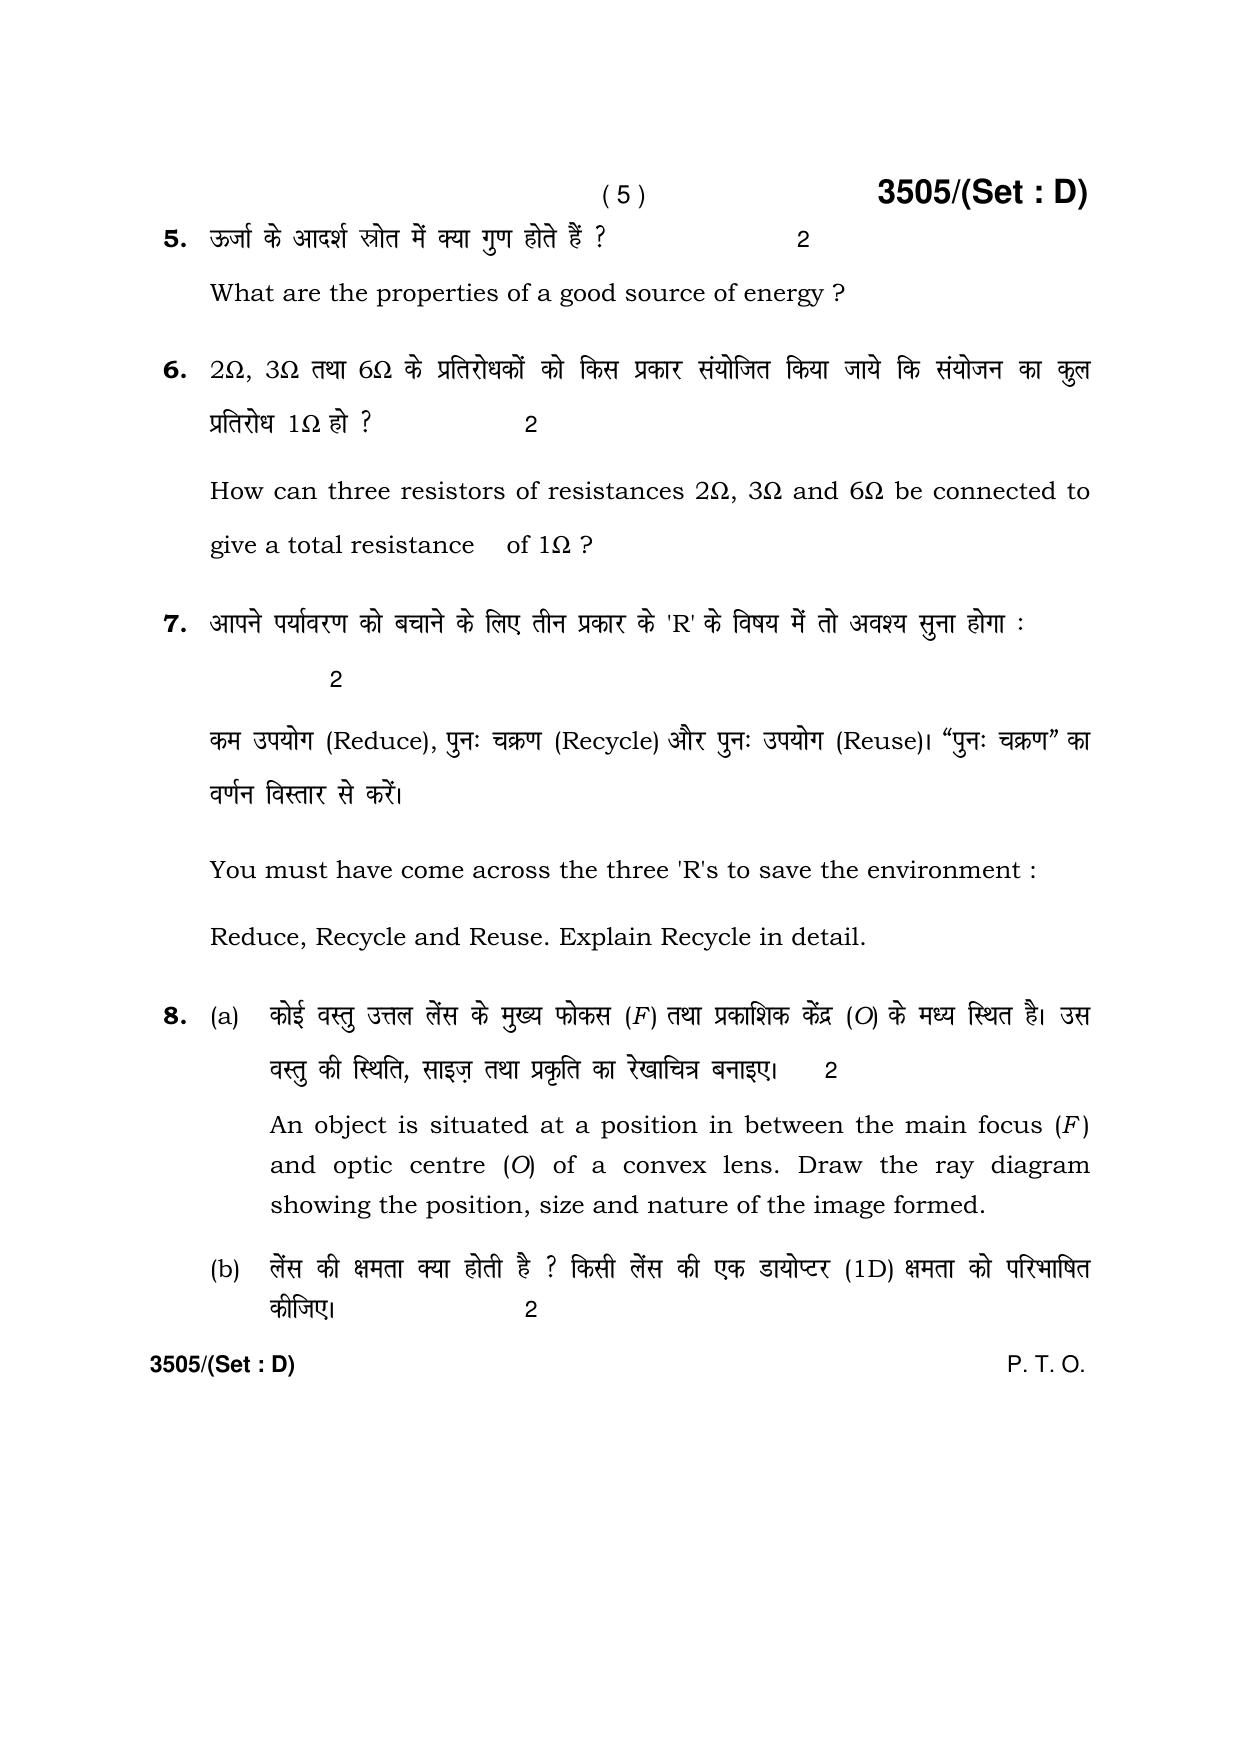 Haryana Board HBSE Class 10 Science -D 2018 Question Paper - Page 5